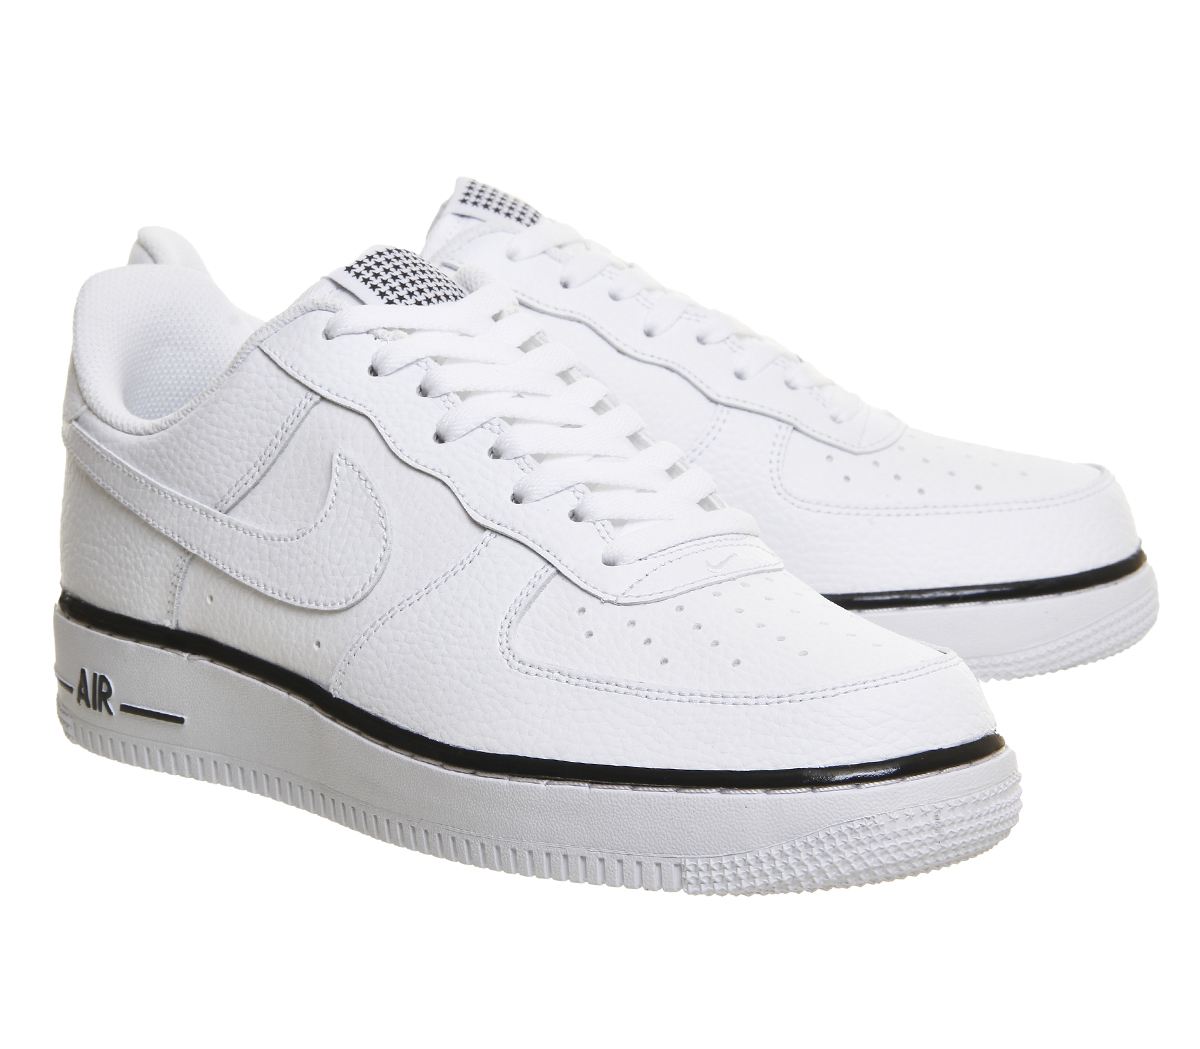 Lyst - Nike Air Force One in White for Men